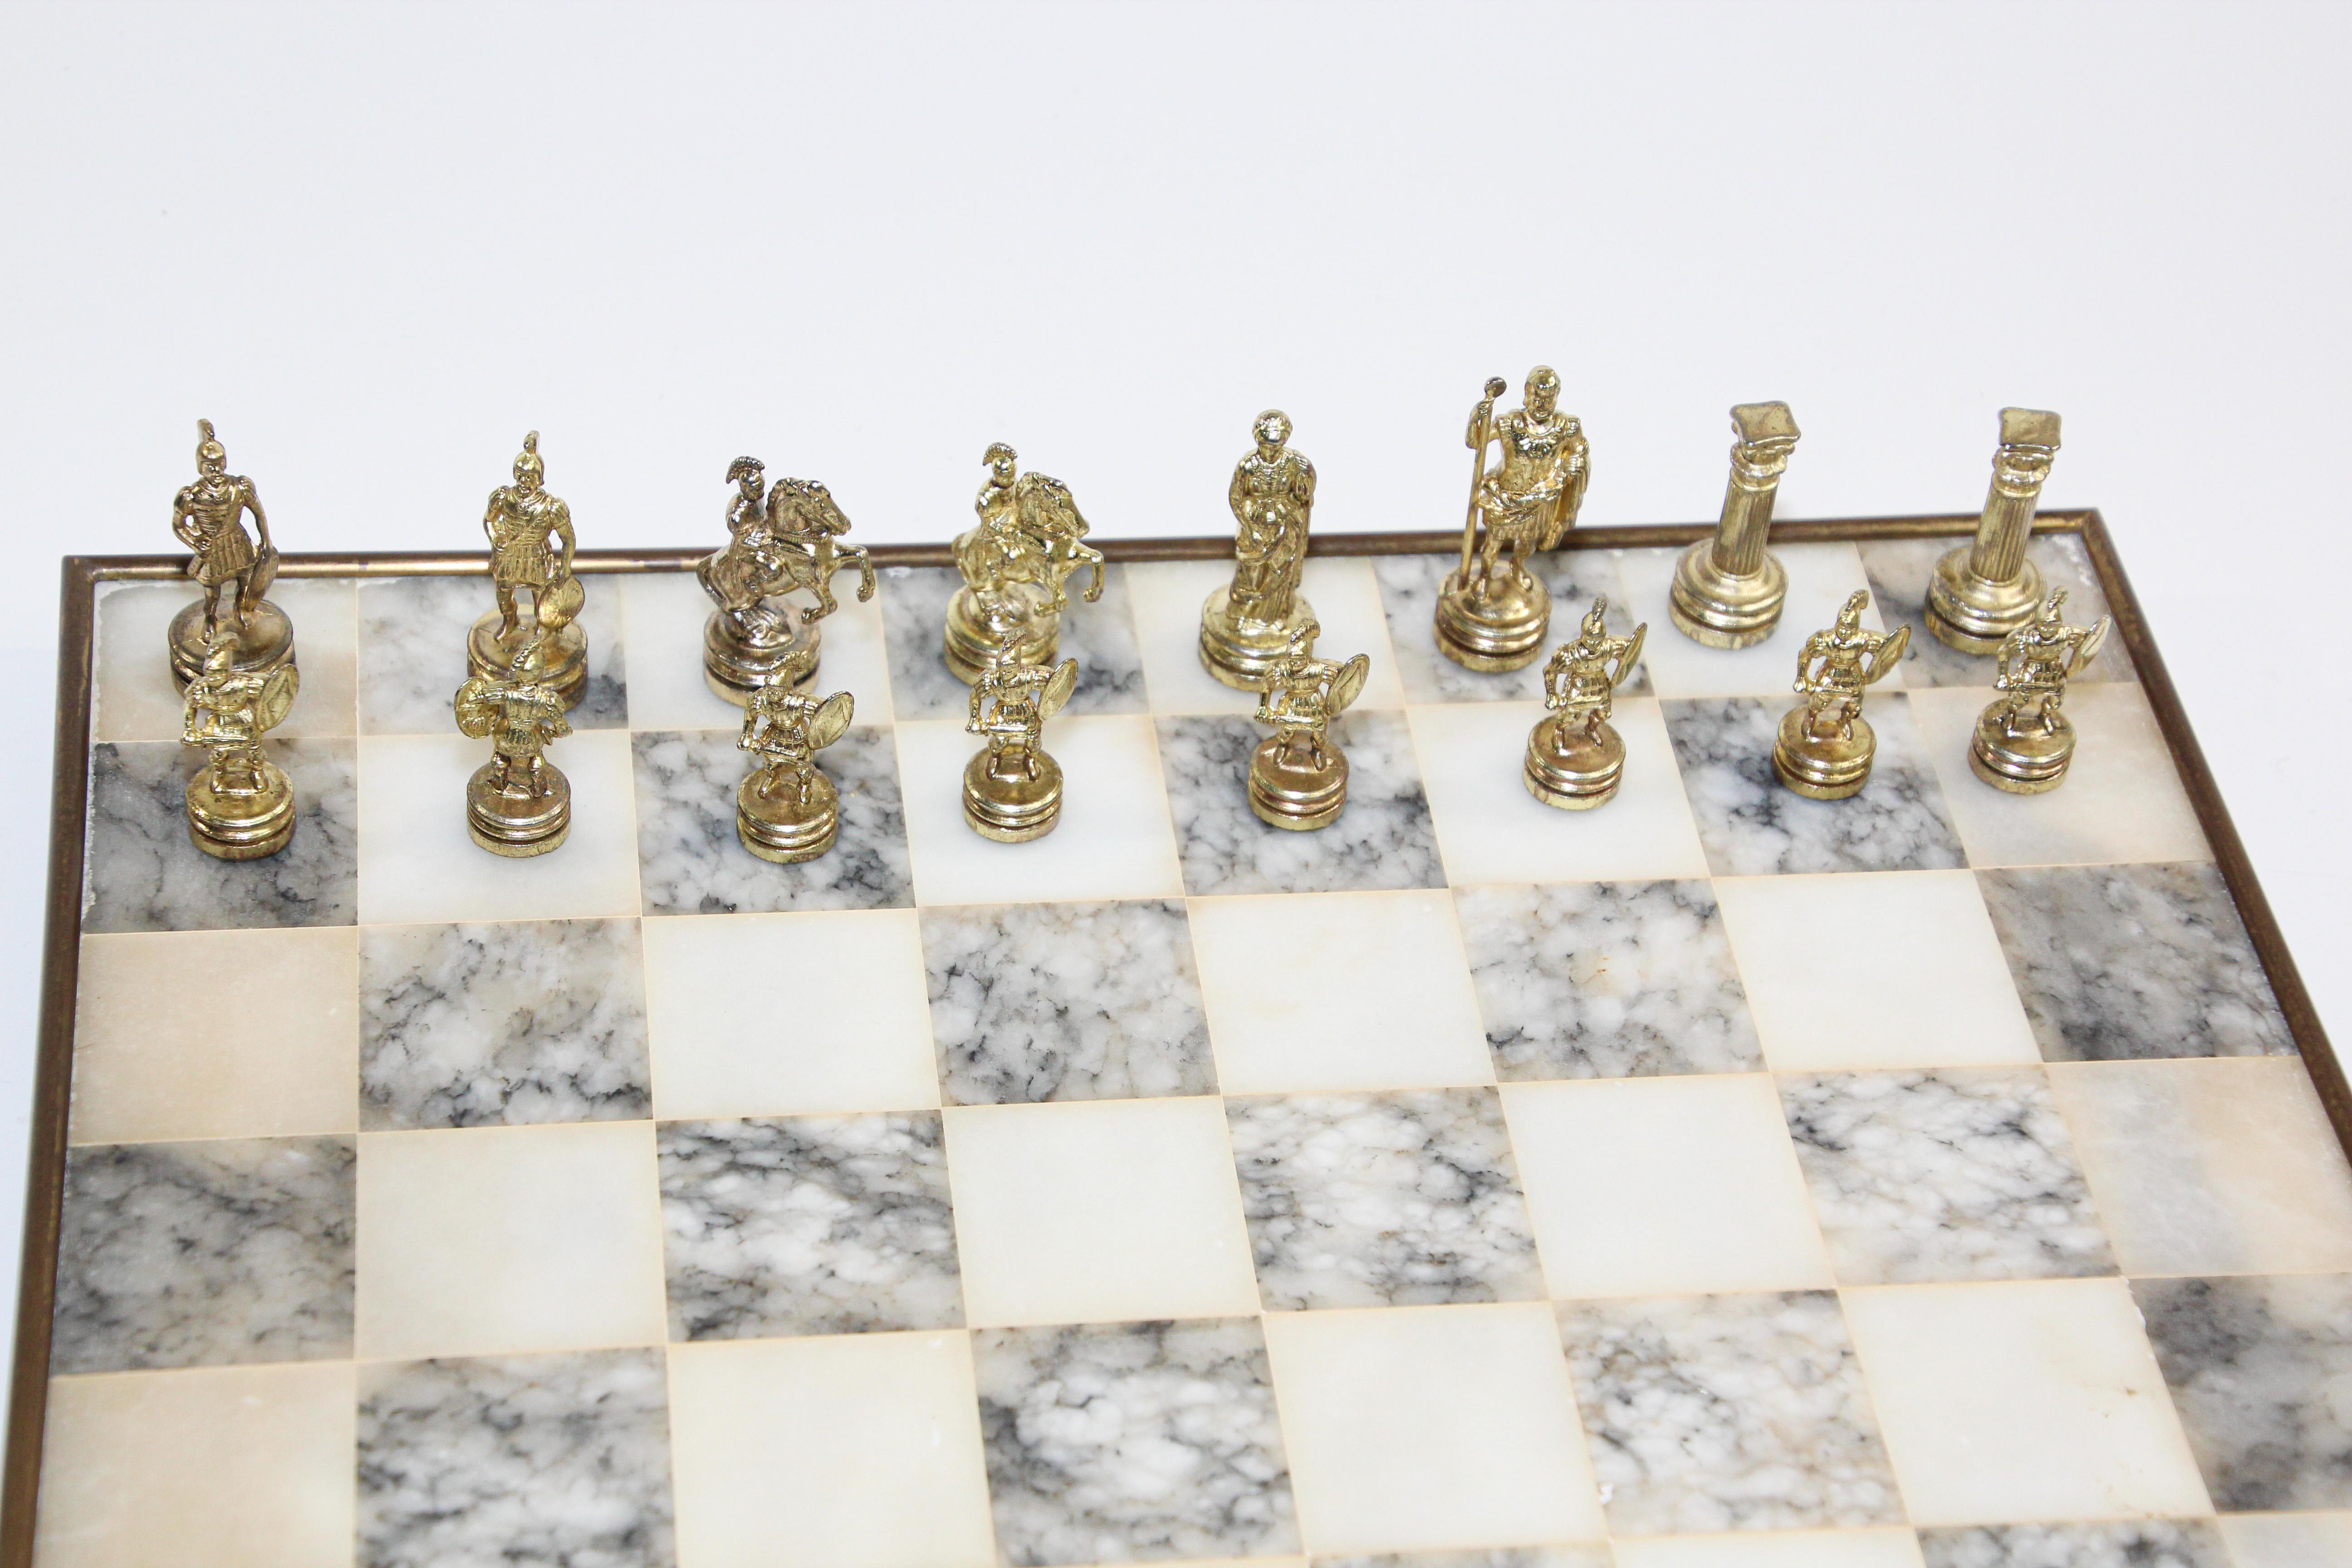 Hand-Crafted Vintage Marble Chess Board with Metal Greek against Roman Chess Pieces